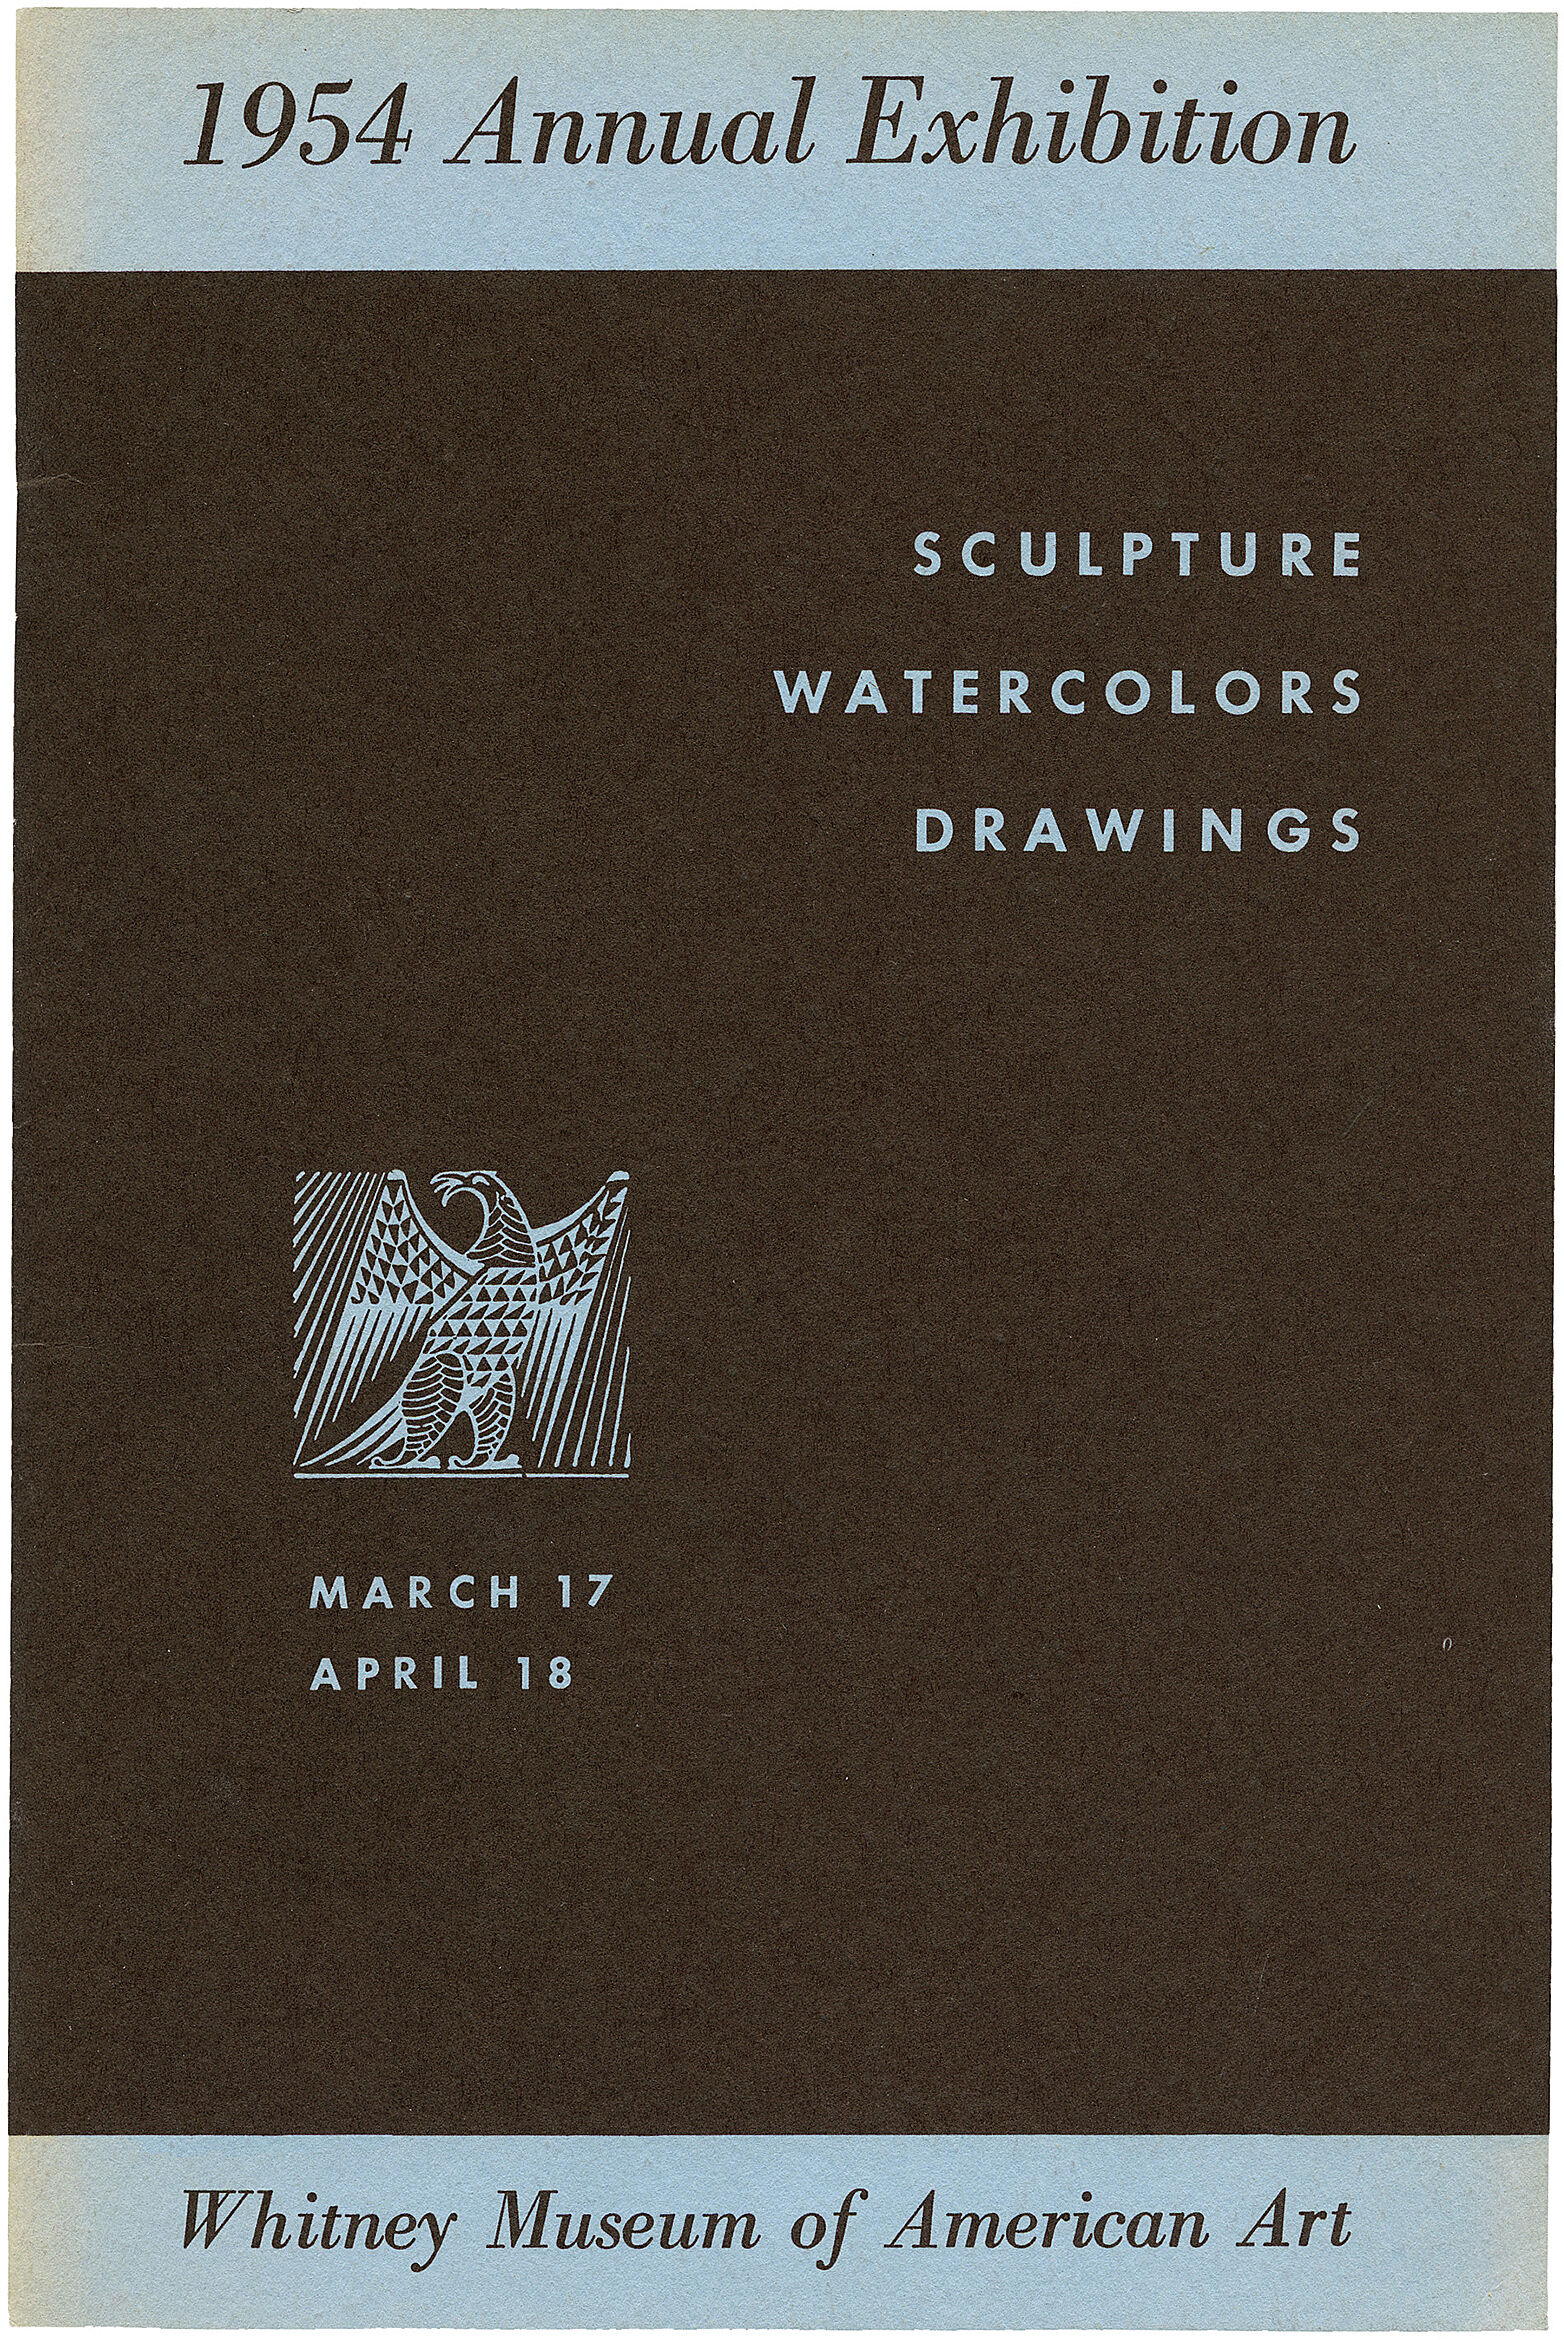 Cover for 1954 Annual Exhibition of Contemporary American Sculpture, Watercolors and Drawings catalogue